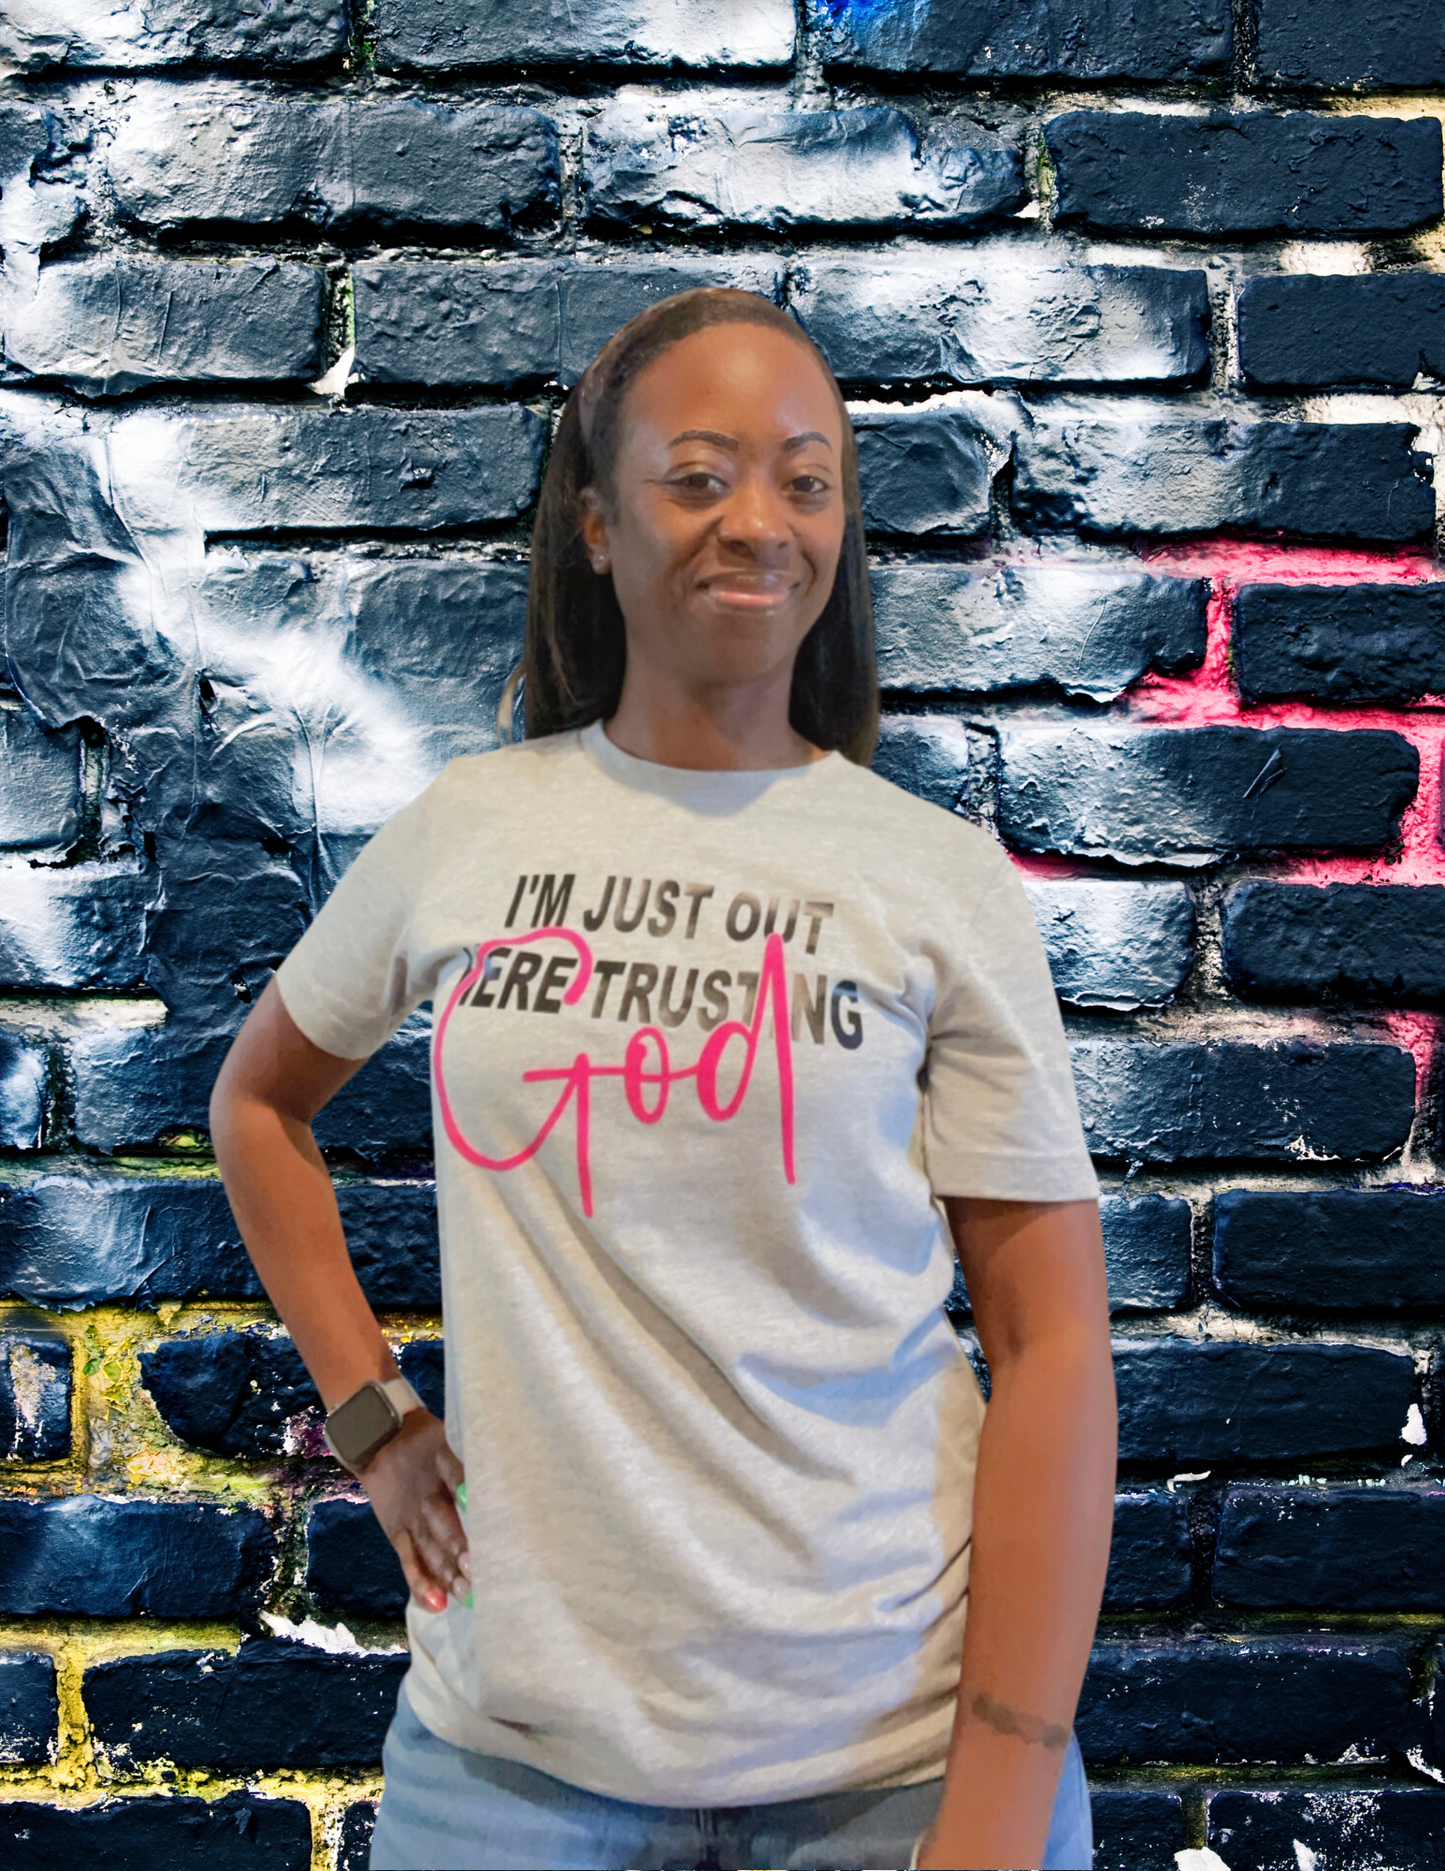 FREE I'm Just Out Here Trusting God T Shirt